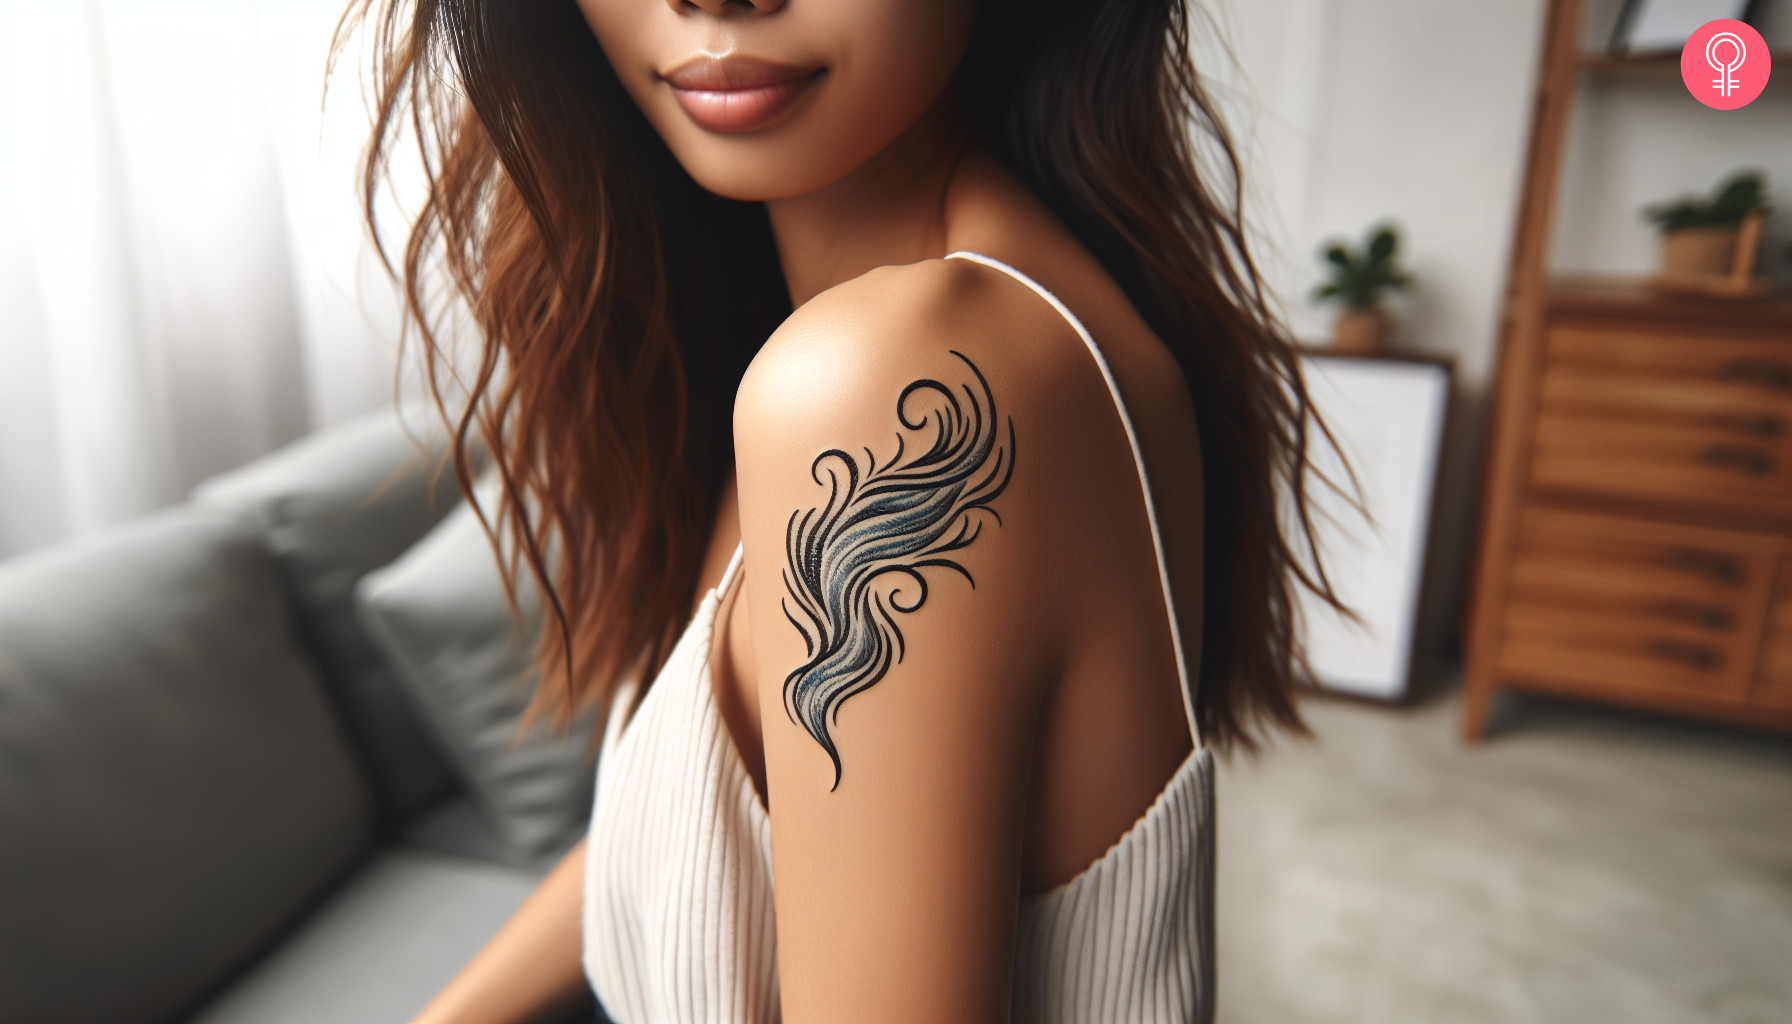 Abstract flow tattoo on the arm of a woman